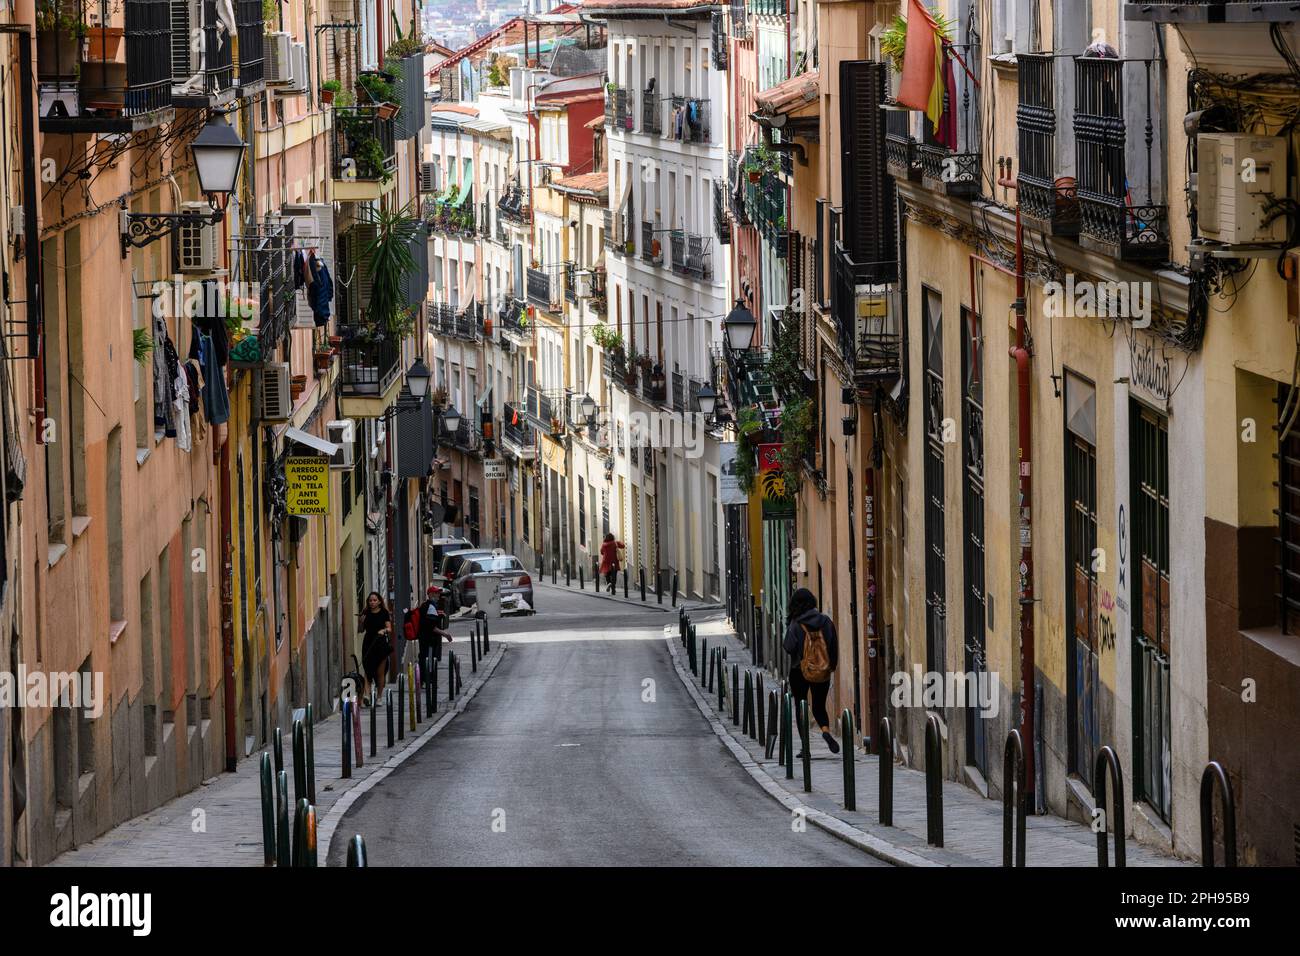 Looking down the calle de Buenavista which leads into the popular, multicultural district of Lavapies, in the center of Embajadores, central Madrid, S Stock Photo